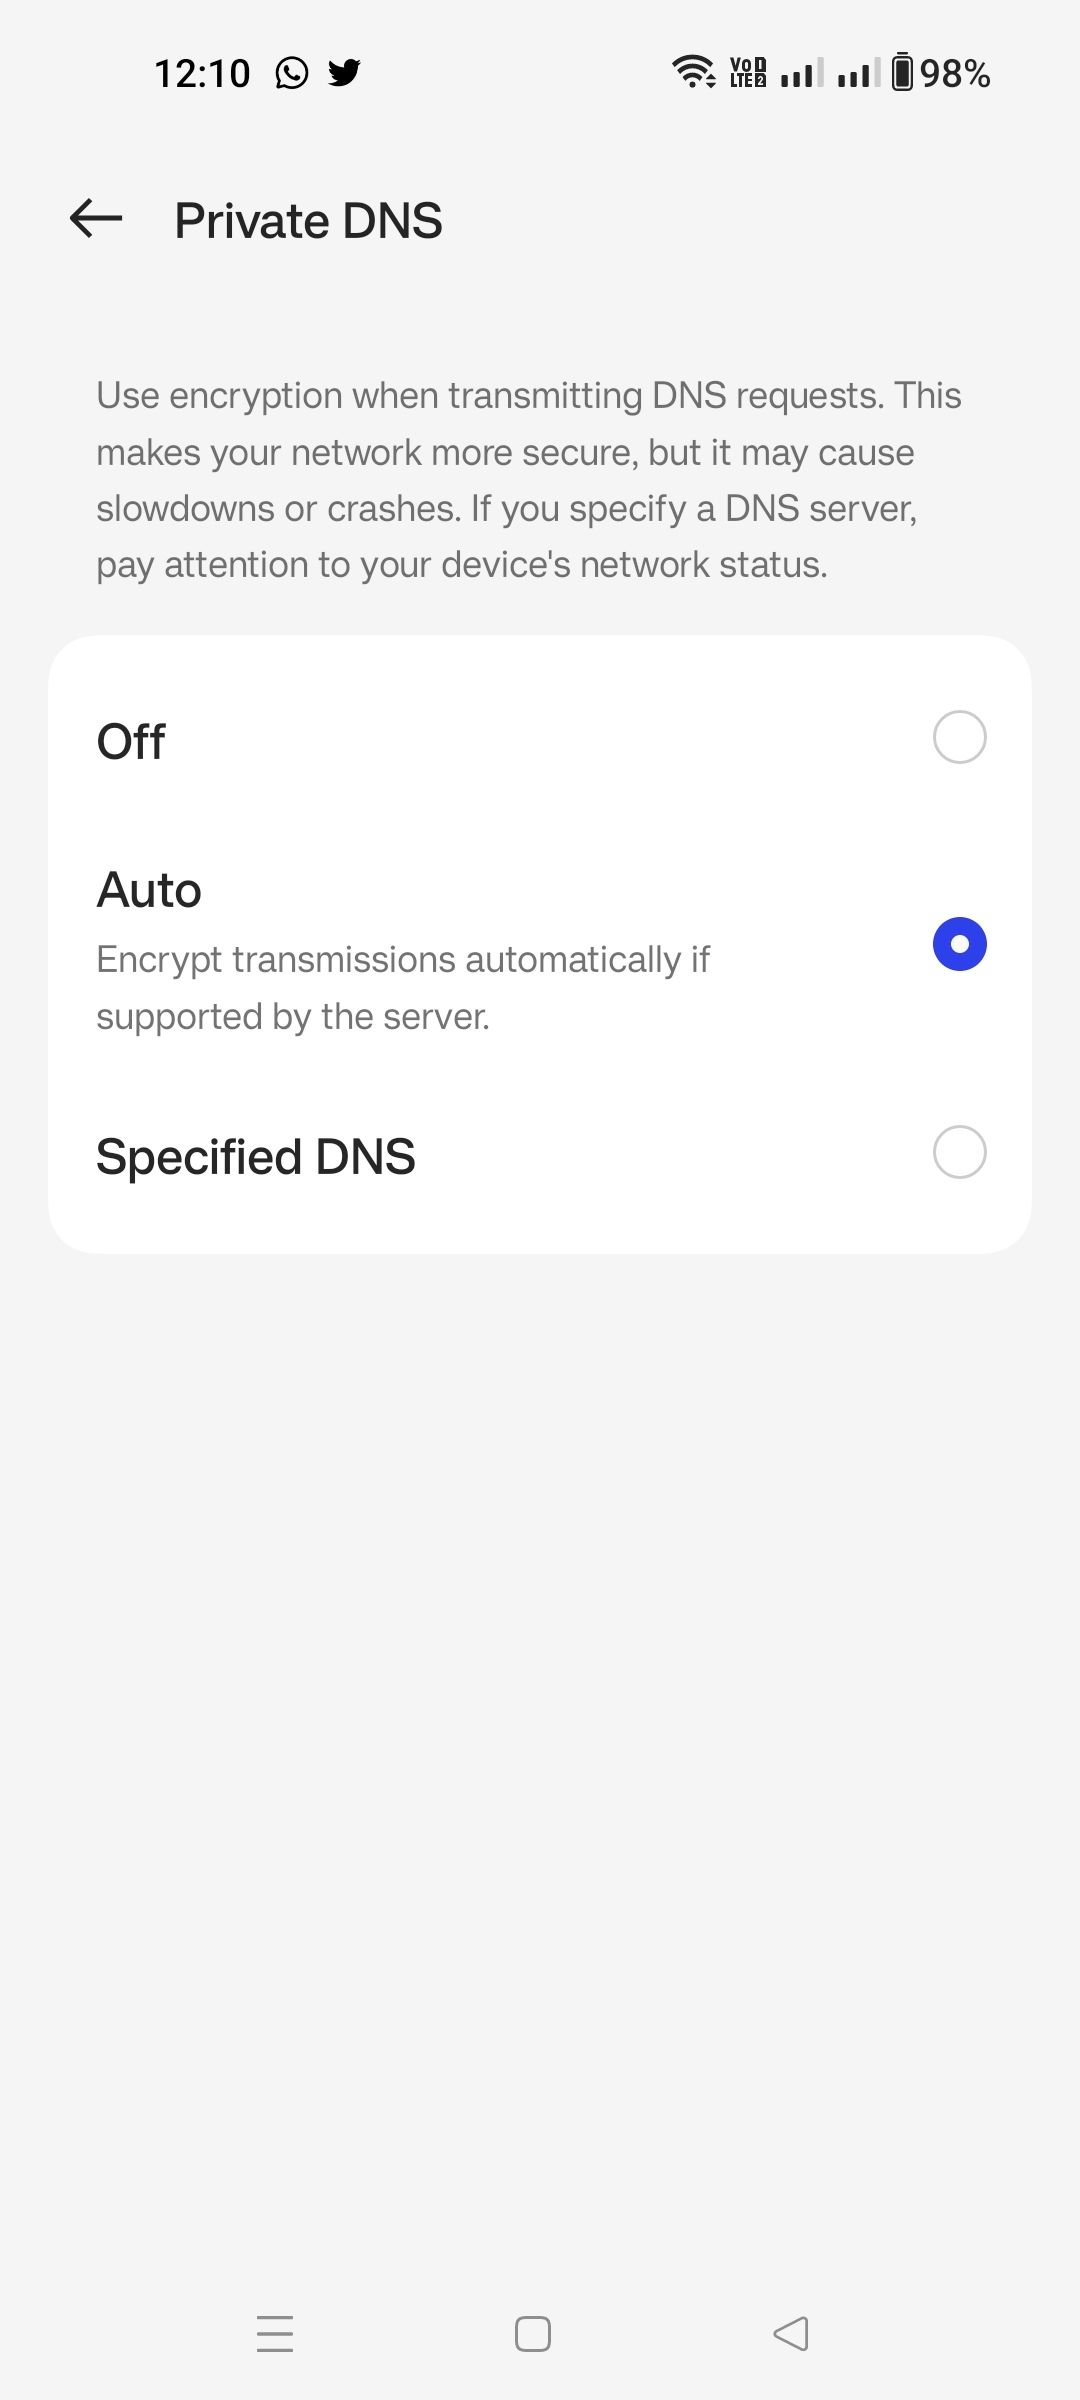 Screenshot-of-Private-DNS-Set-as-Auto-on-Android-Device